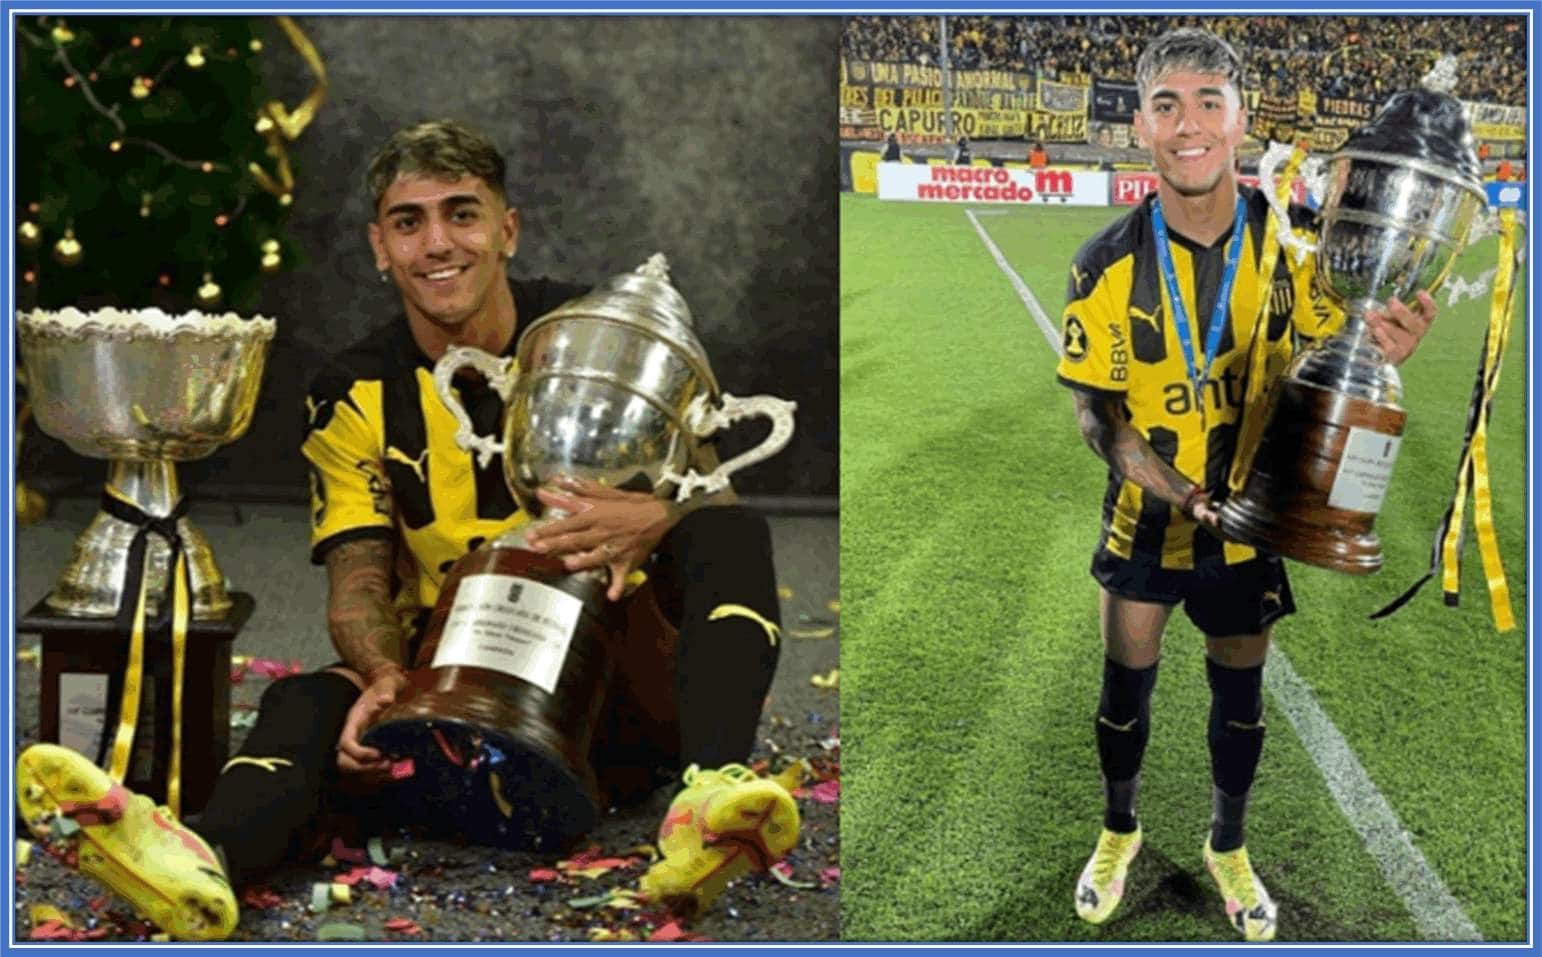 In 2014, Torres supported Peñarol to an under-15 national title.